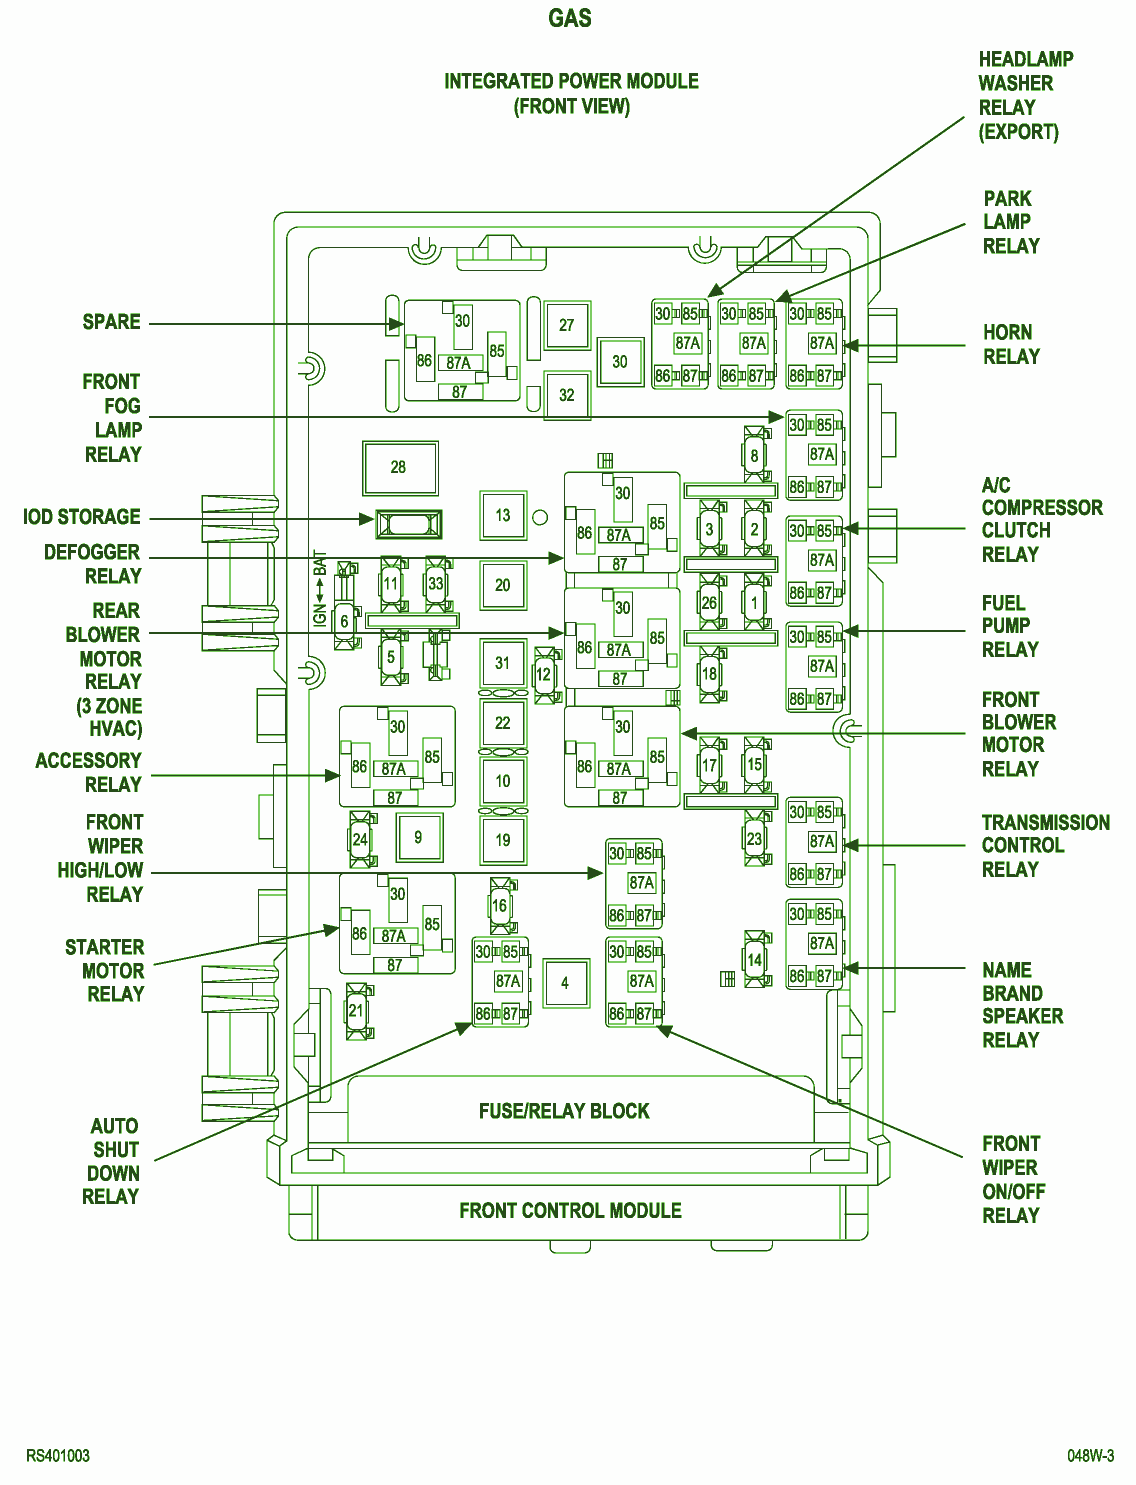 2005 Dodge Magnum Stereo Wiring Diagram from www.autofuseboxdiagram.com